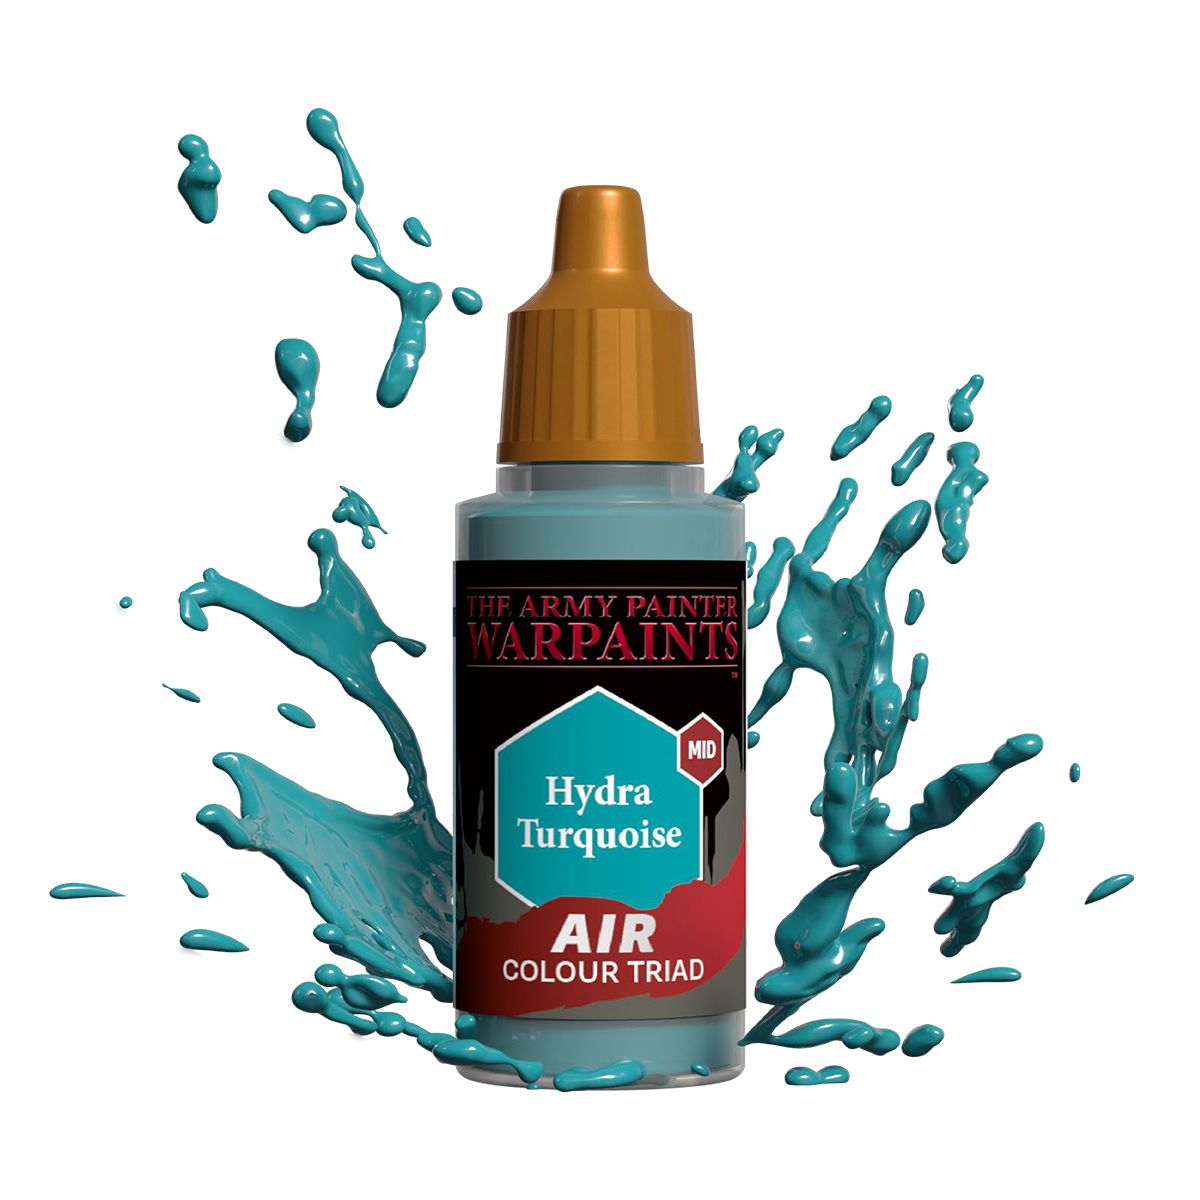 Army Painter Warpaints - Air Hydra Turquoise Acrylic Paint 18ml